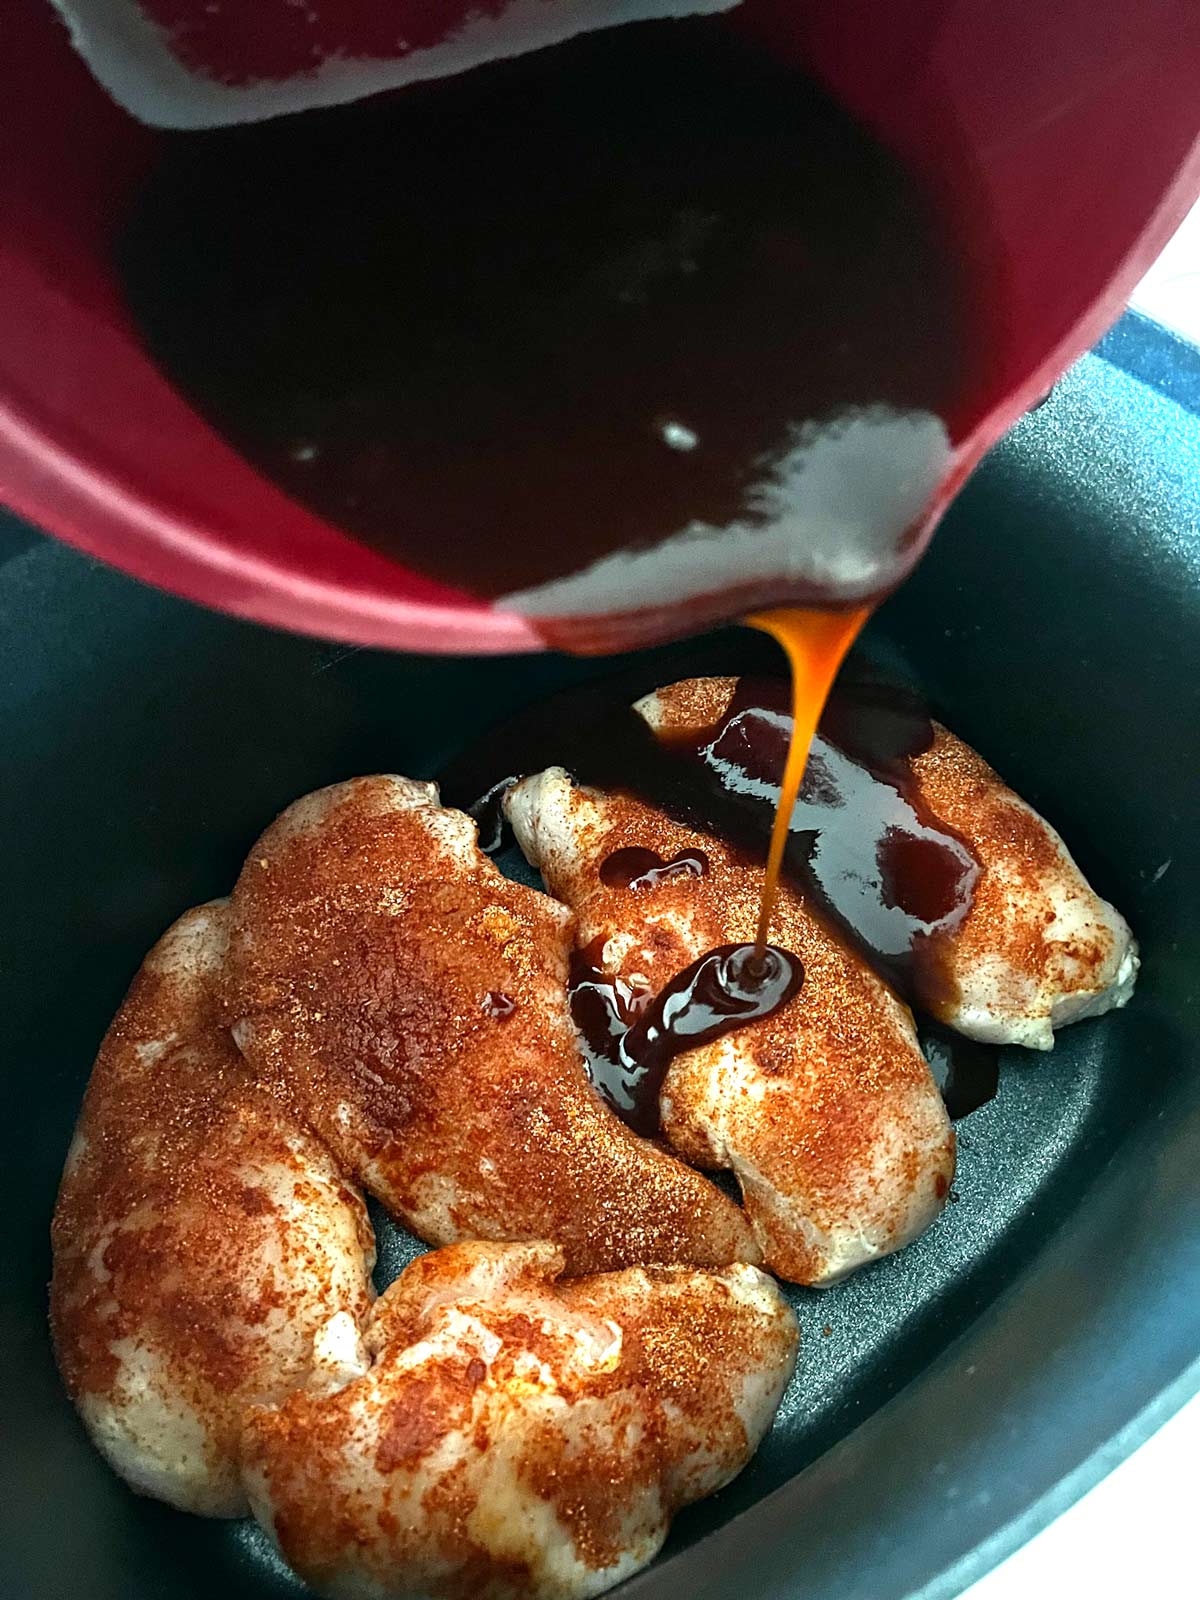 BBQ sauce being poured over chicken in a slow cooker.